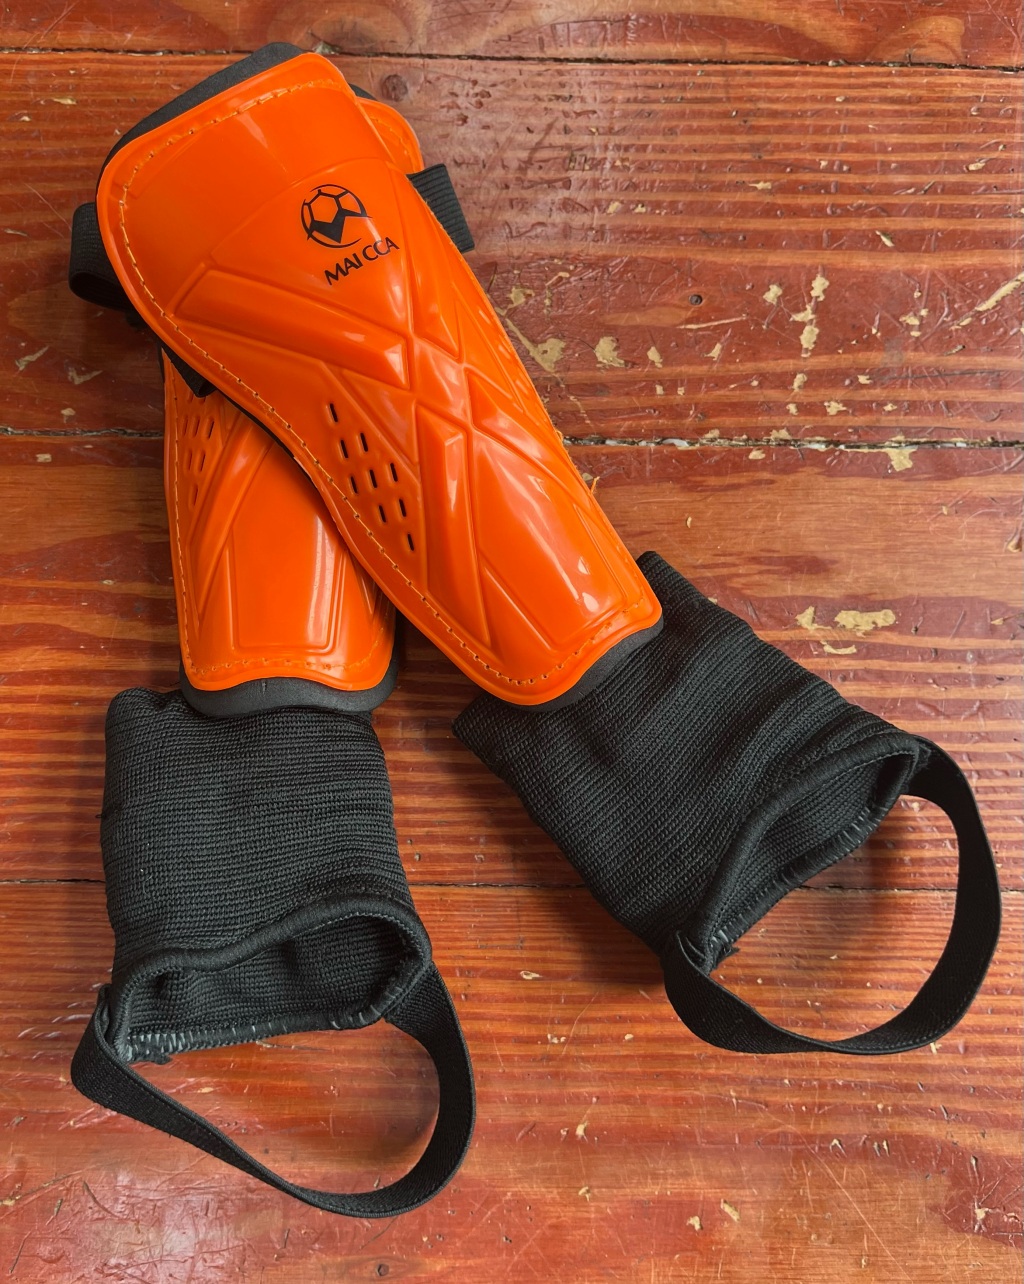 Protect Small Shins With This Affordable Soccer Safety Equipment